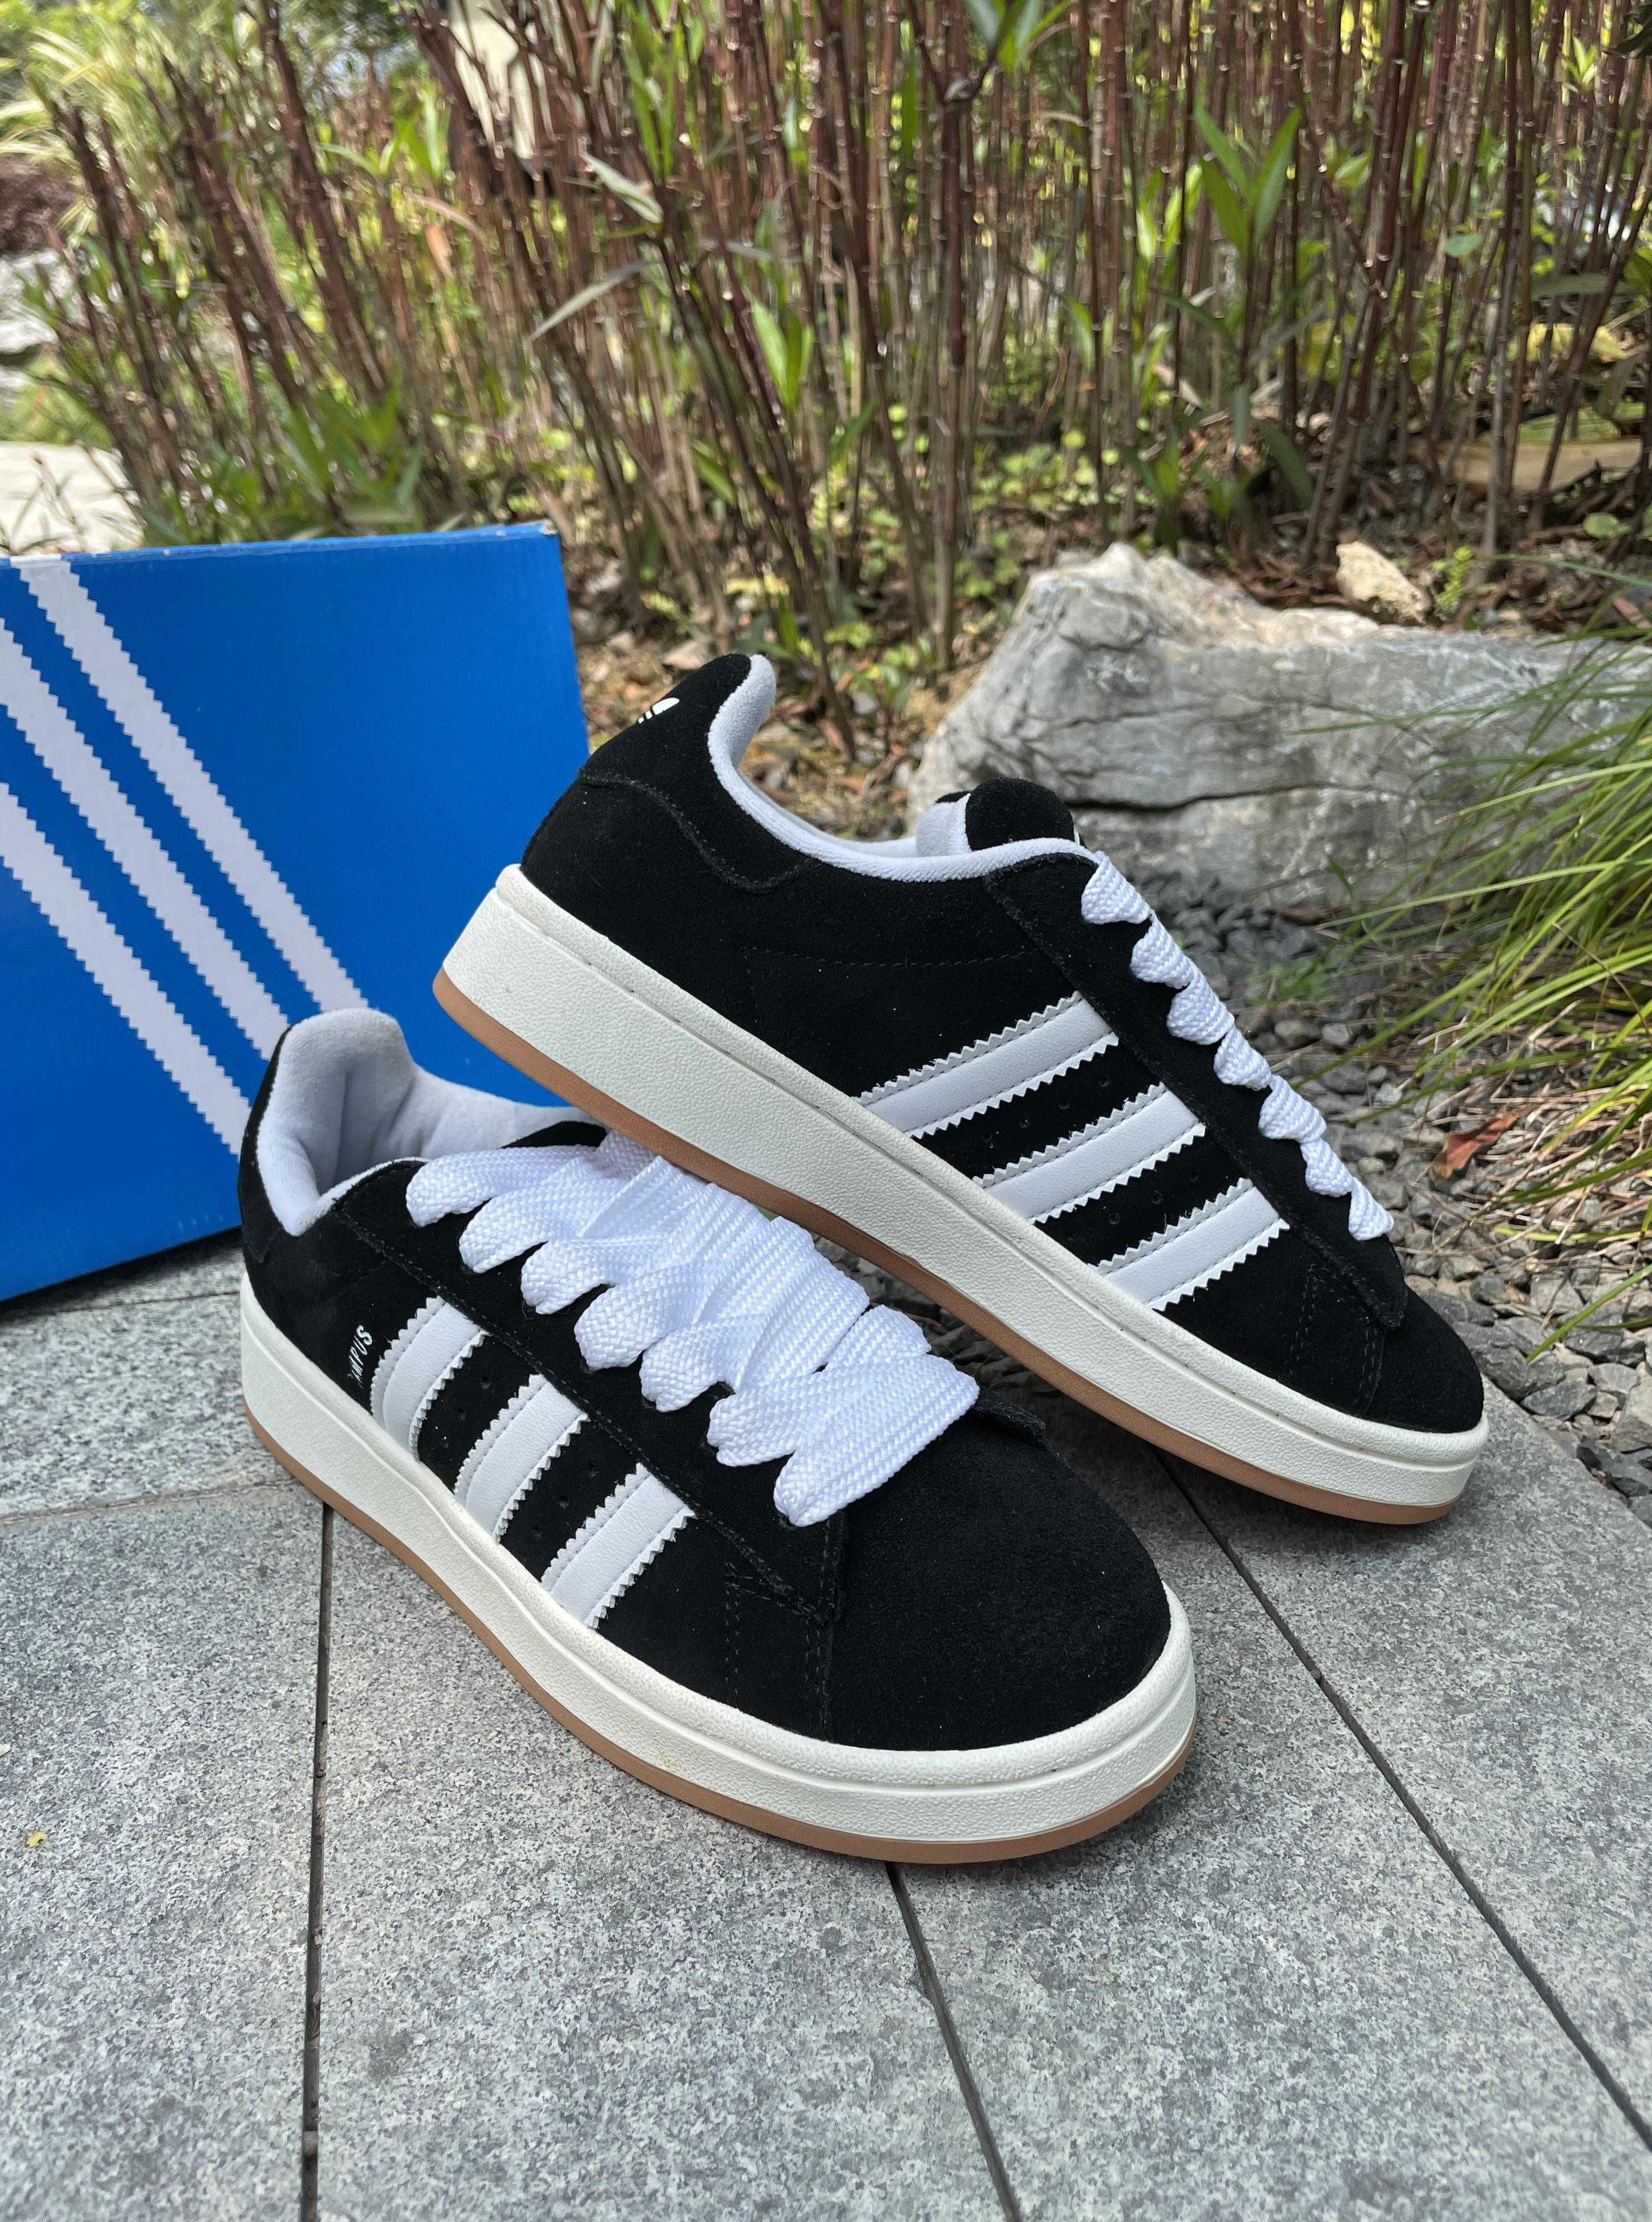 campus 00 Women's sneakers black and white 39 size